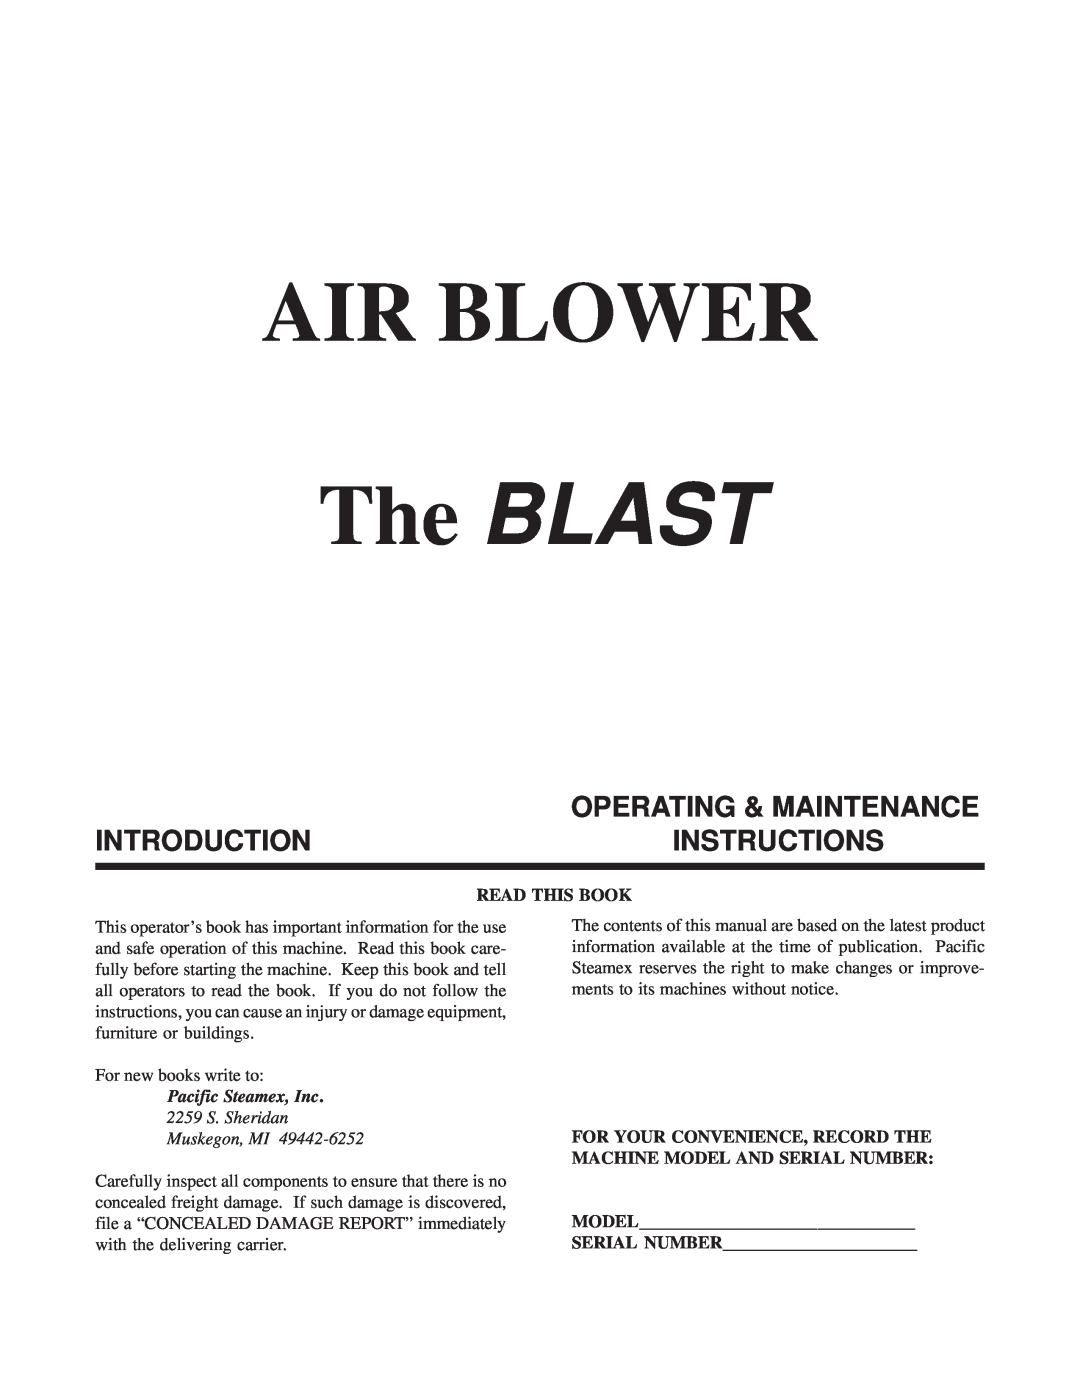 Sharp AIR BLOWER manual Read This Book, Air Blower, The BLAST, Operating & Maintenance, Introduction, Instructions 